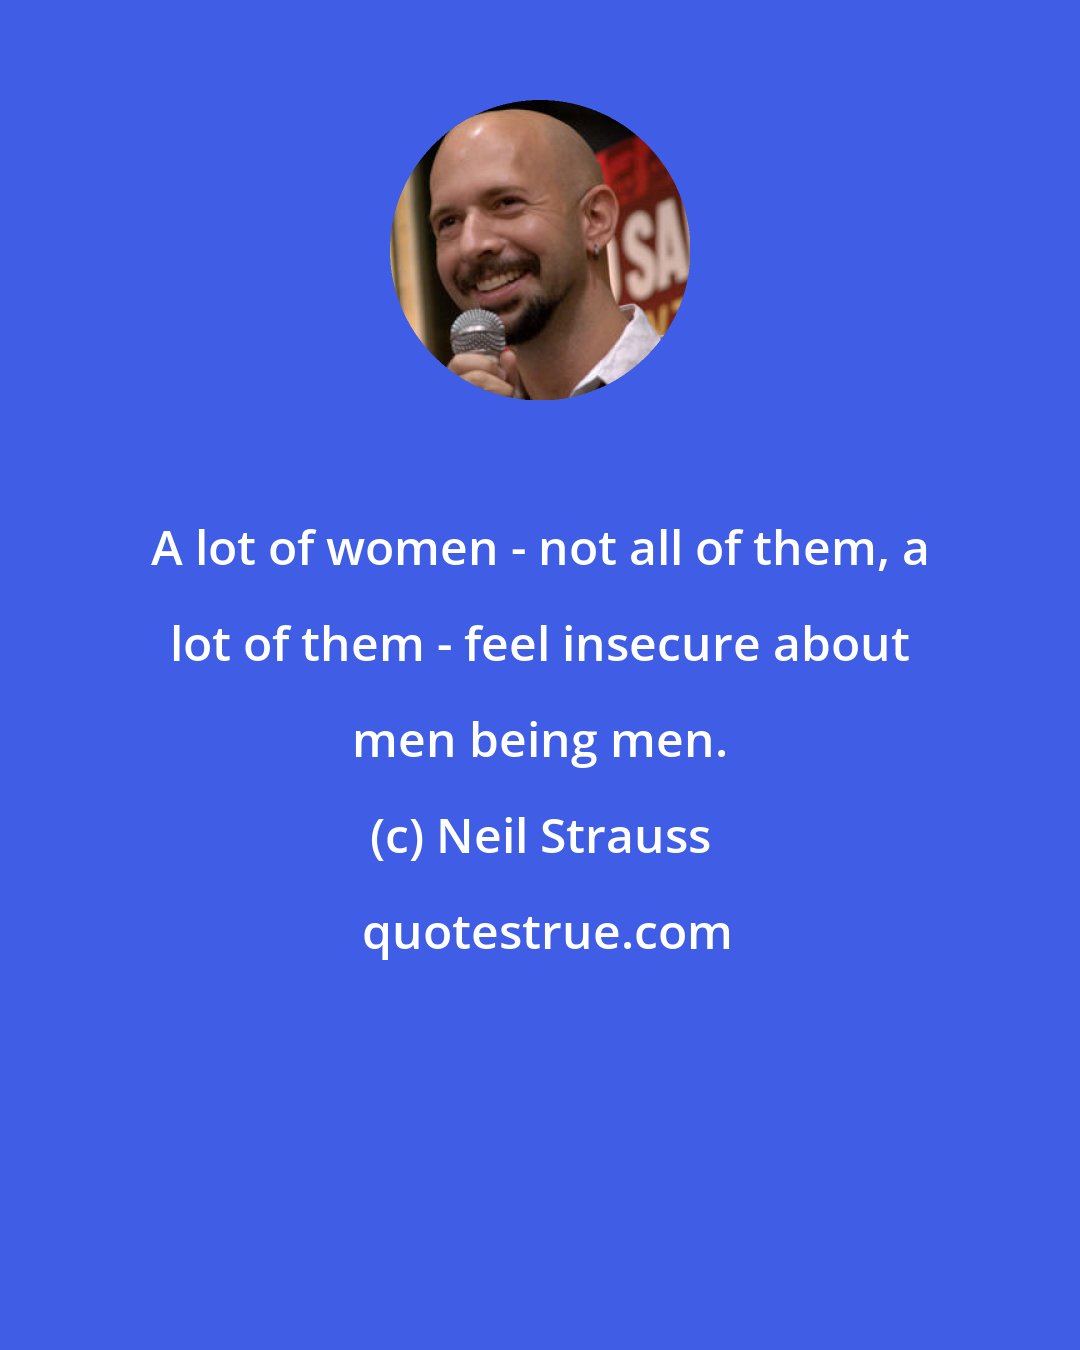 Neil Strauss: A lot of women - not all of them, a lot of them - feel insecure about men being men.